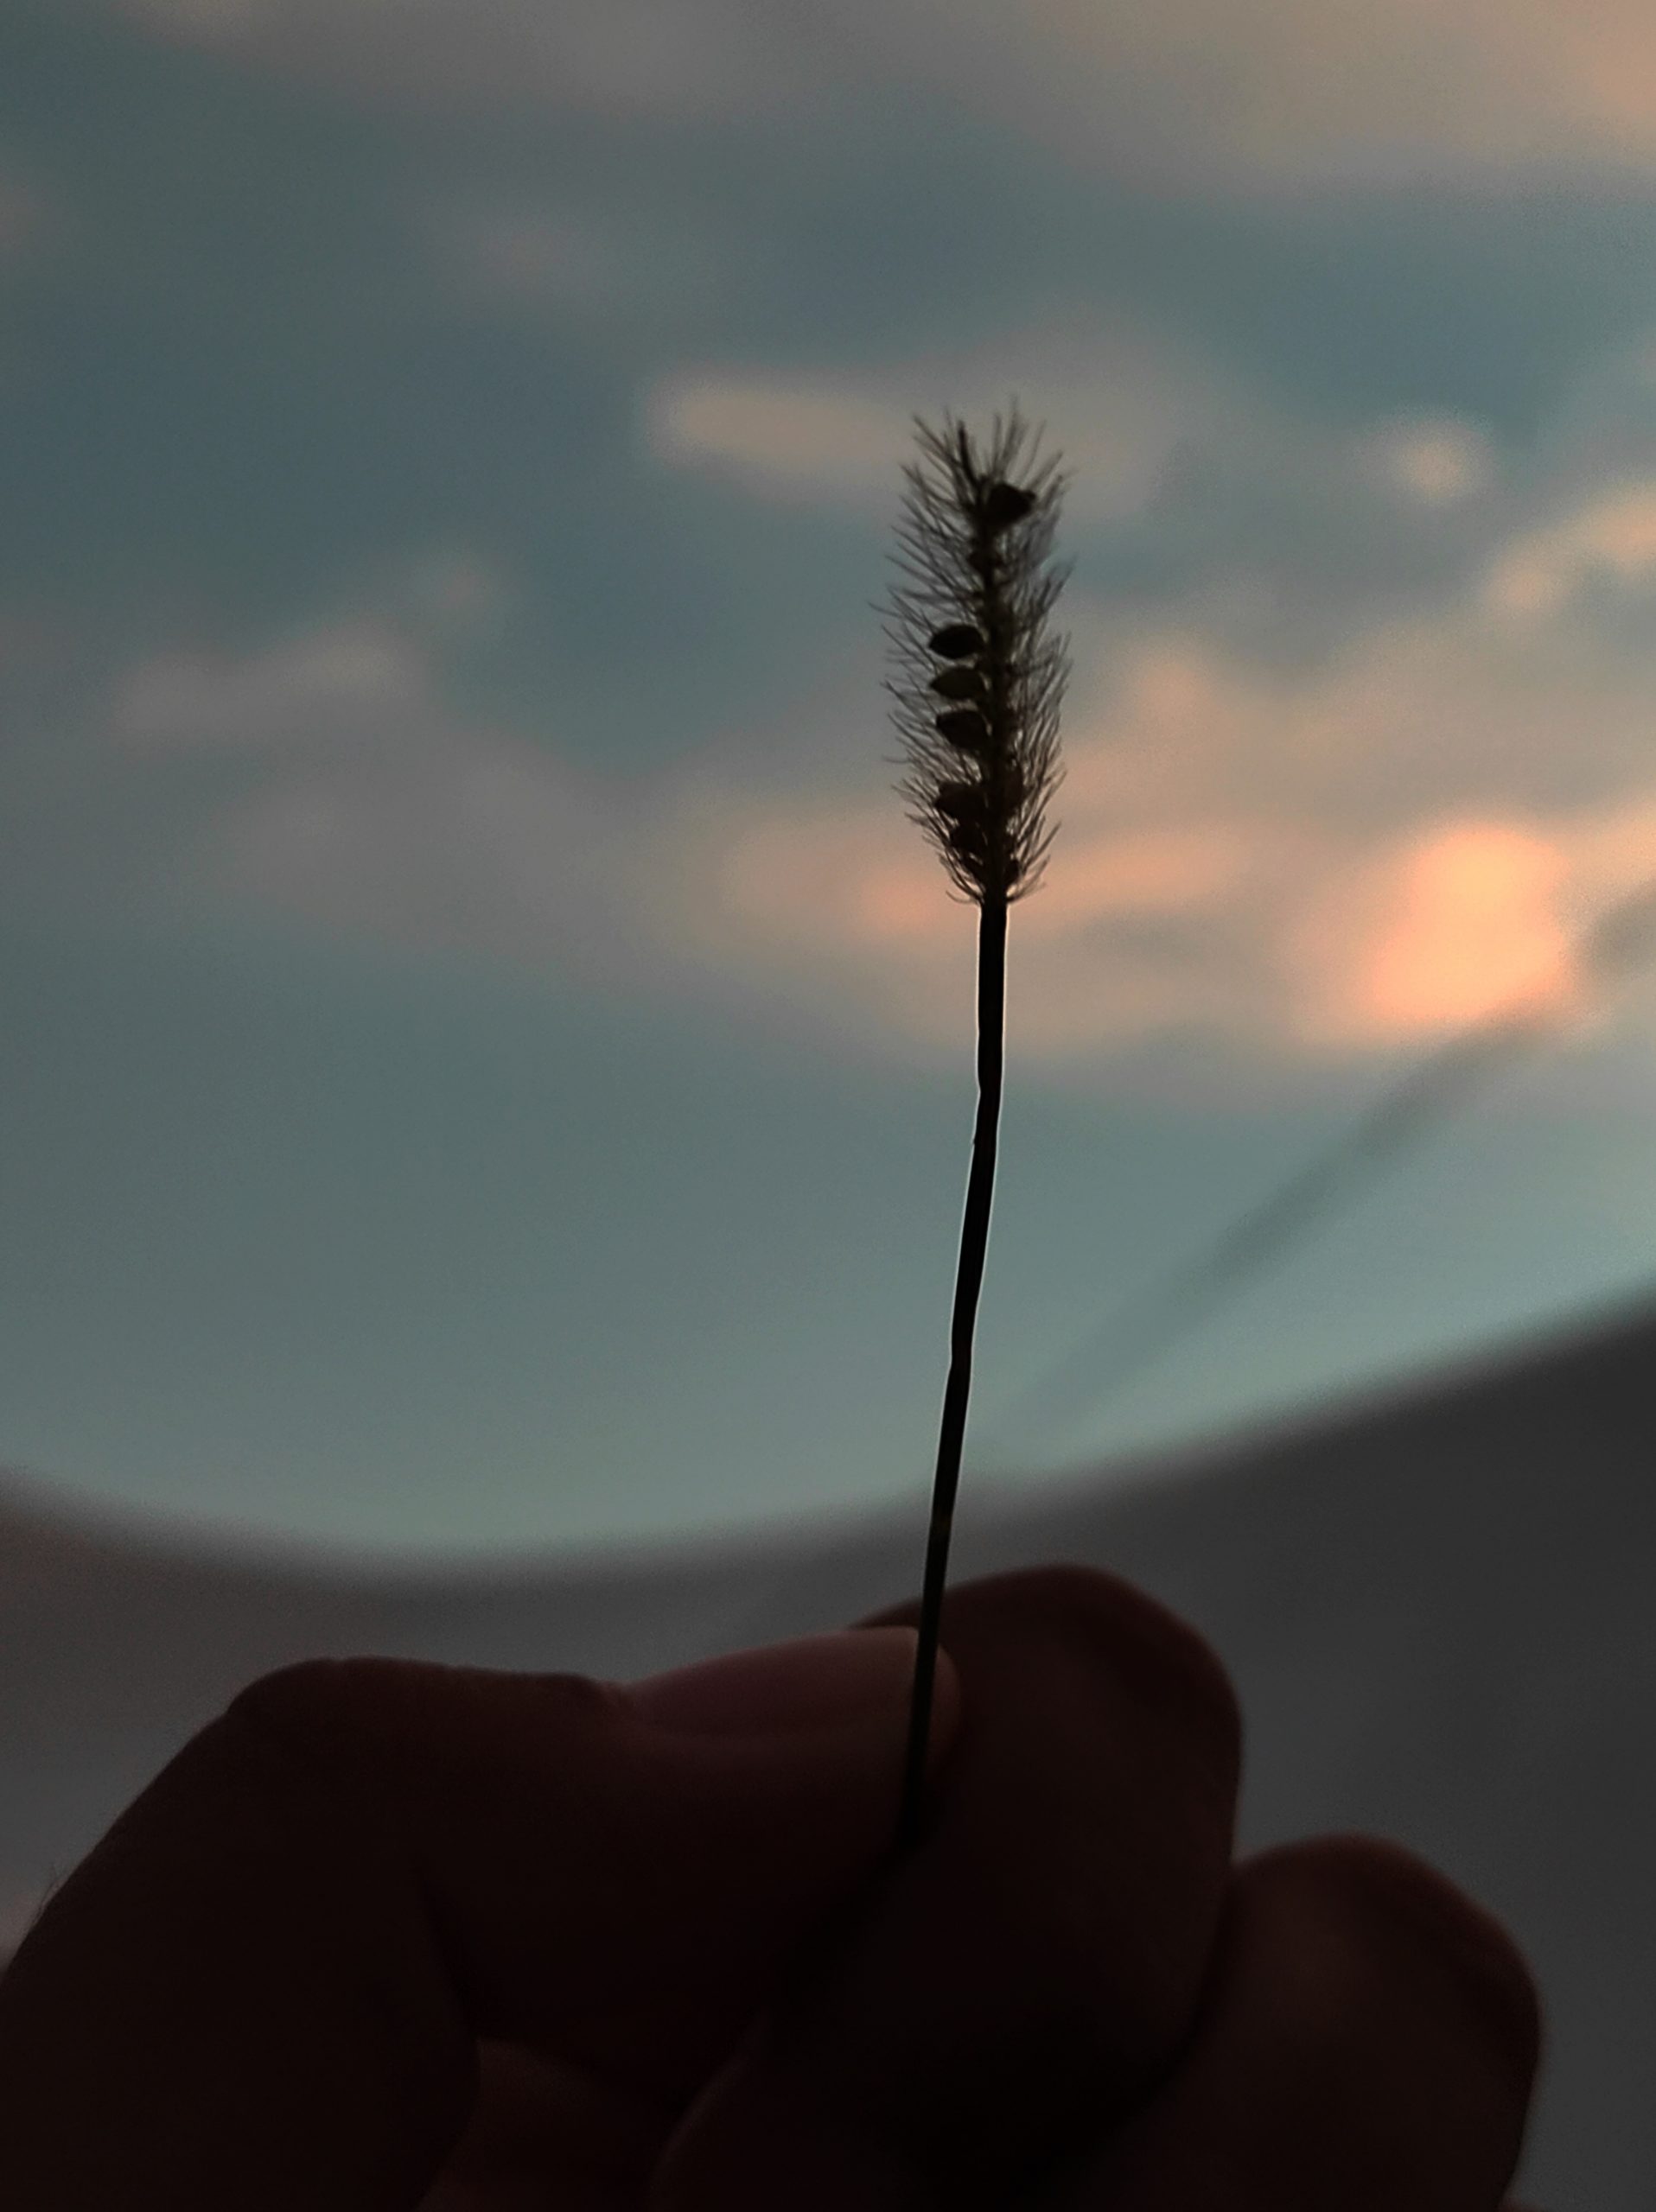 A straw of grass in hand